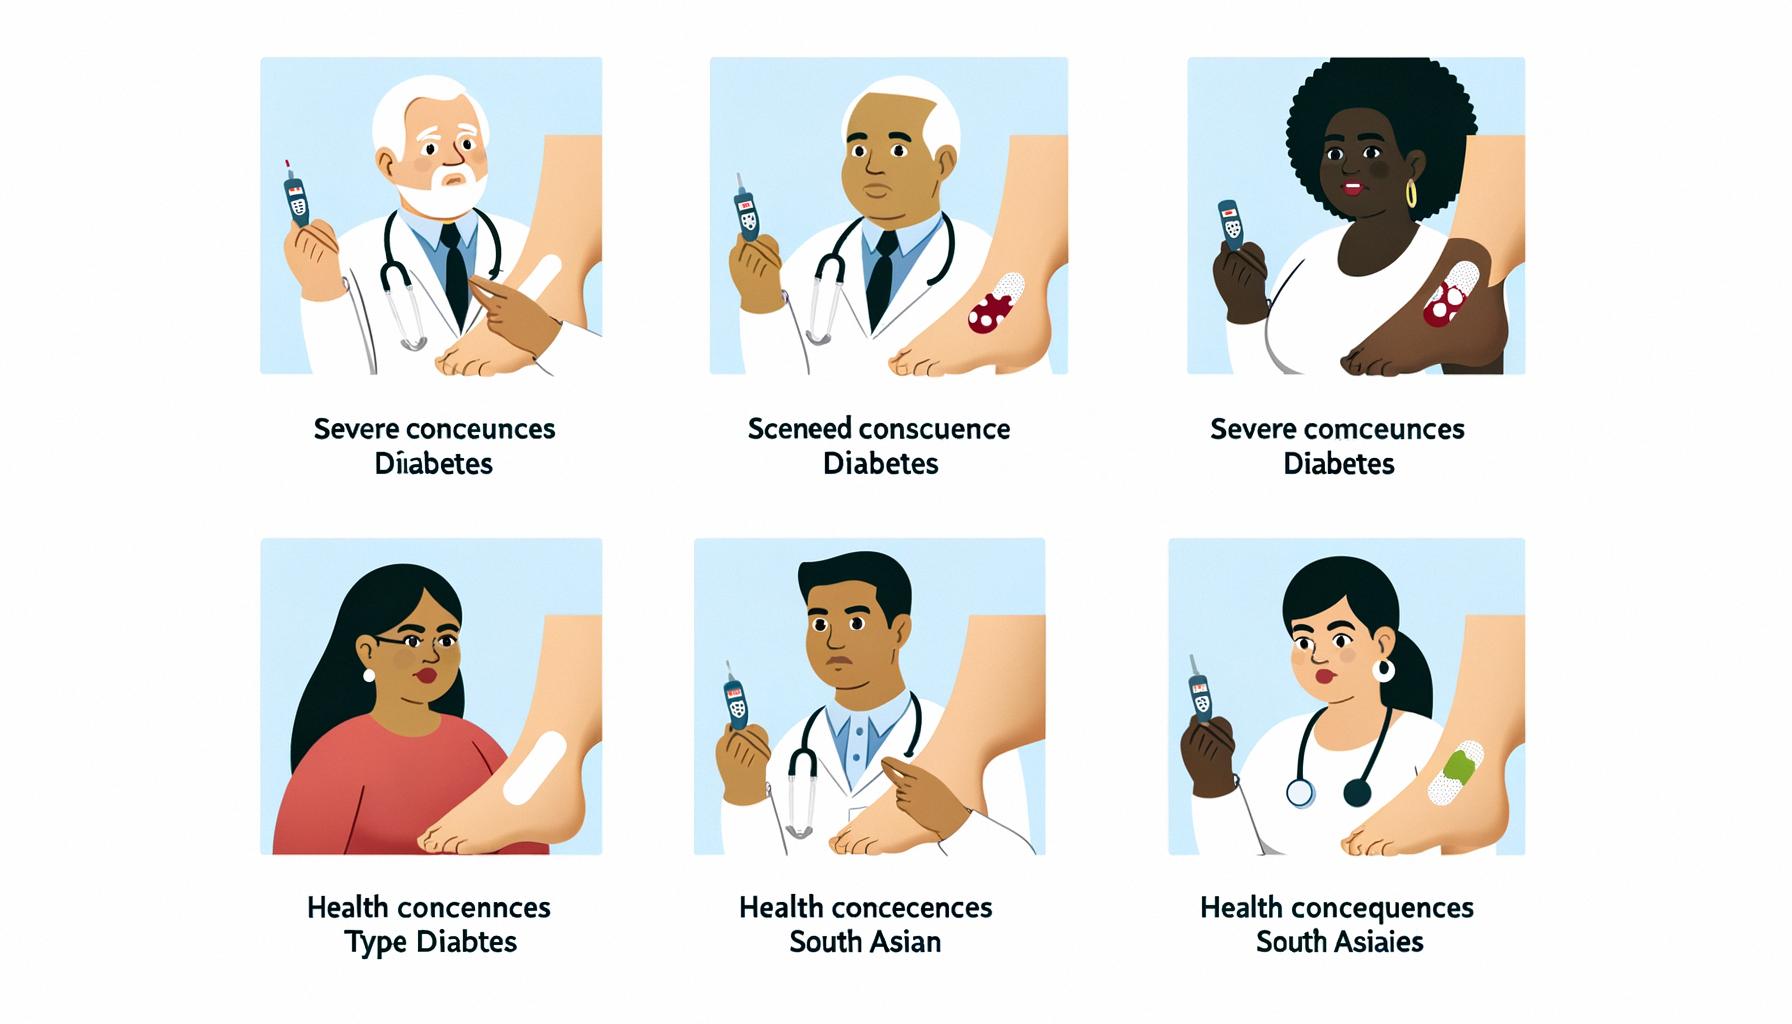 Type 2 diabetes has diverse, severe consequences affecting various populations globally